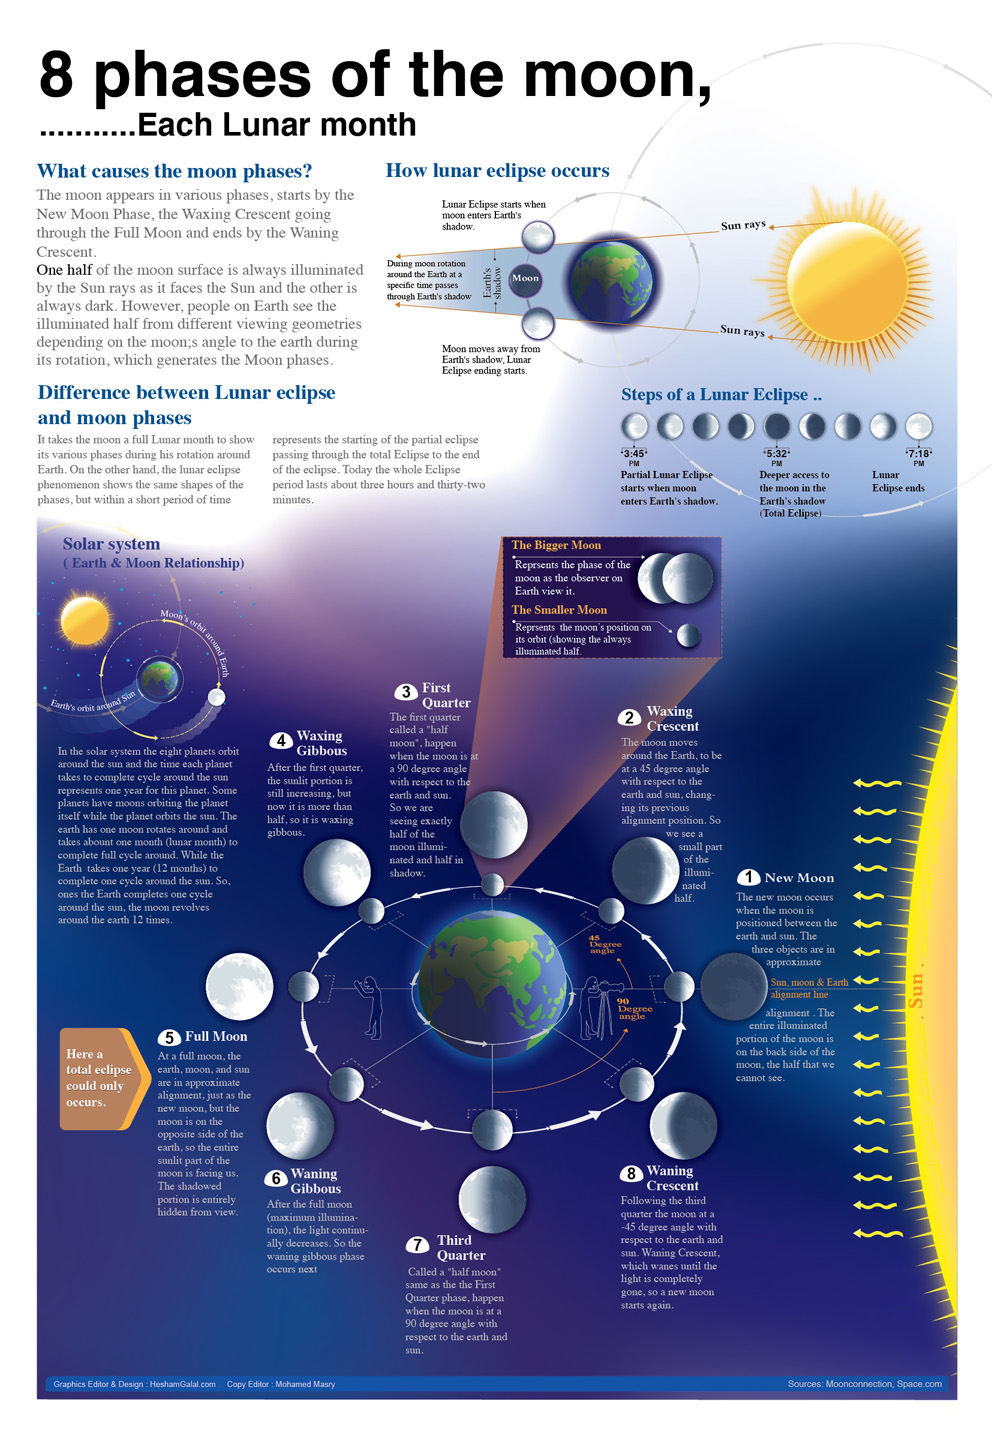 8-phases-of-the-moon-visual-ly